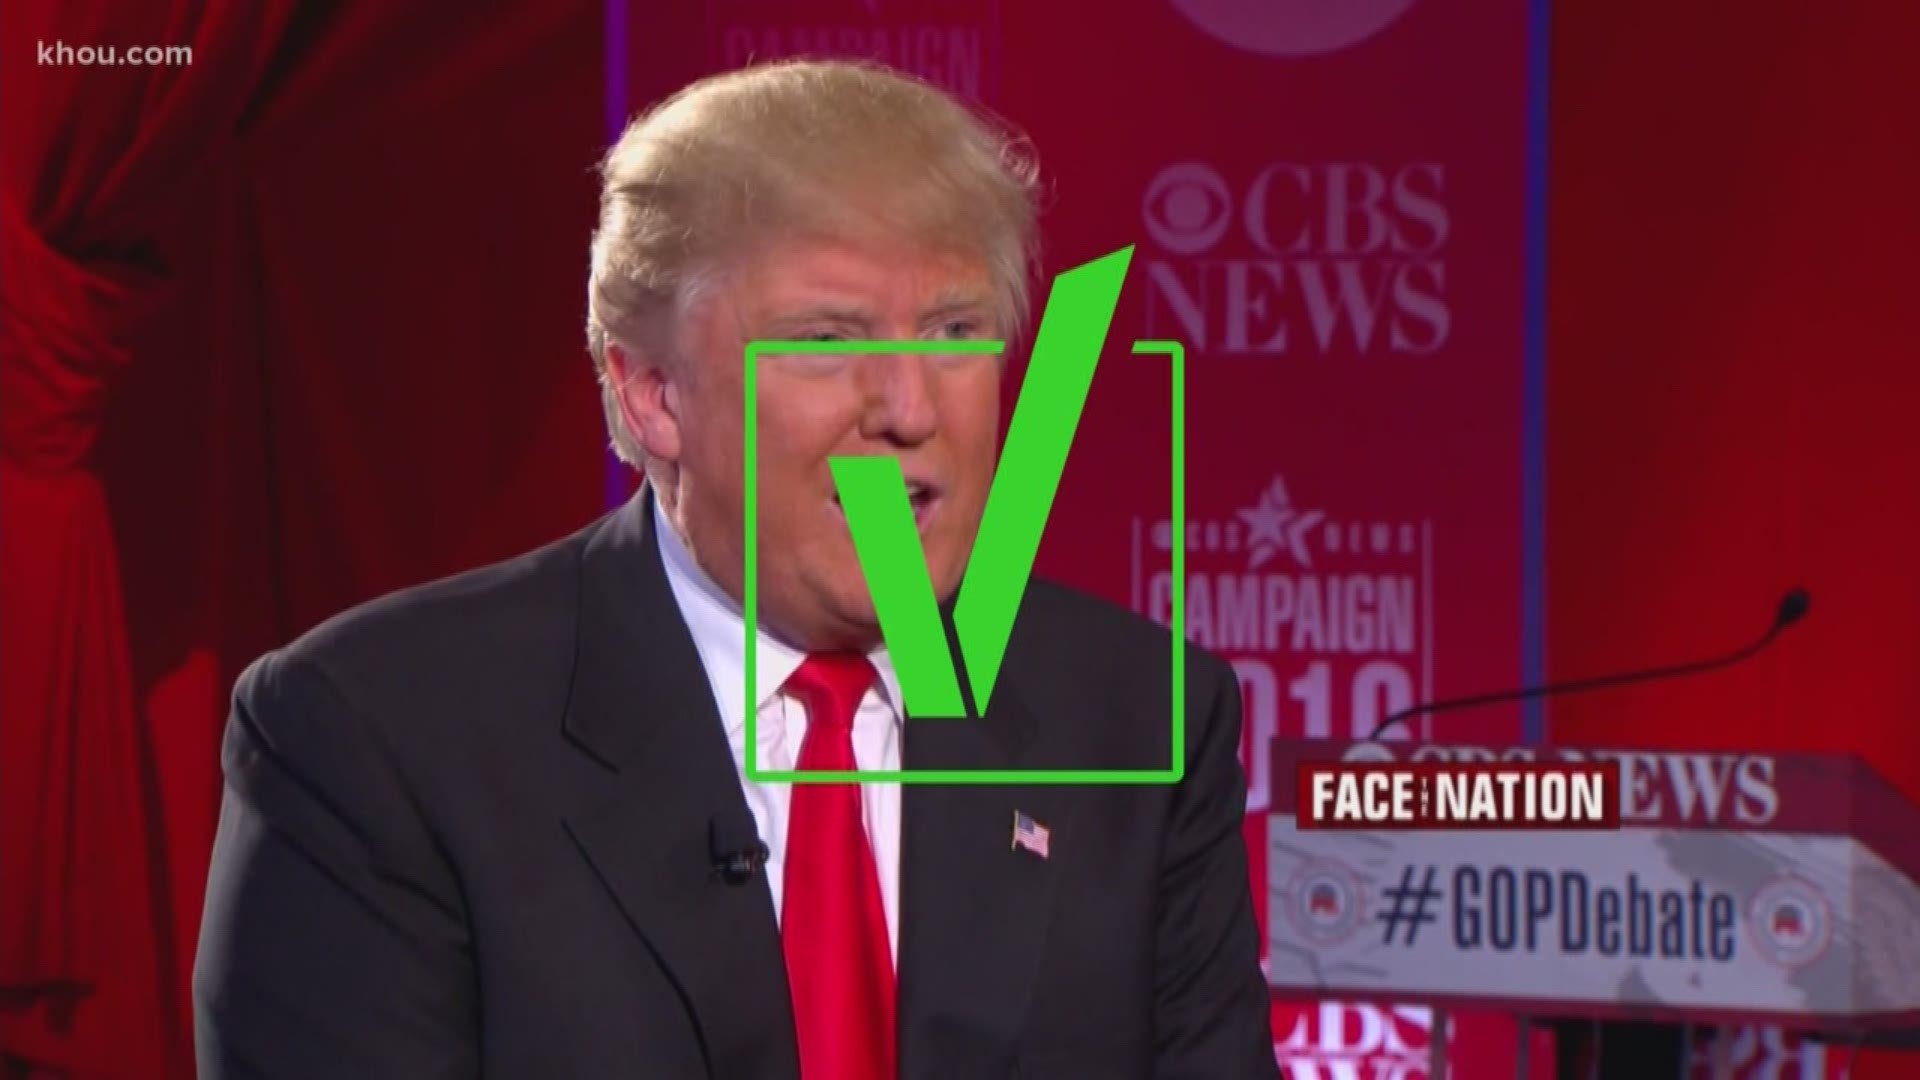 A viewer asked our Verify team to look into whether the Republican Party would automatically back the incumbent – President Donald Trump – in the 2020 presidential election or if other candidates can attempt to get the nomination.